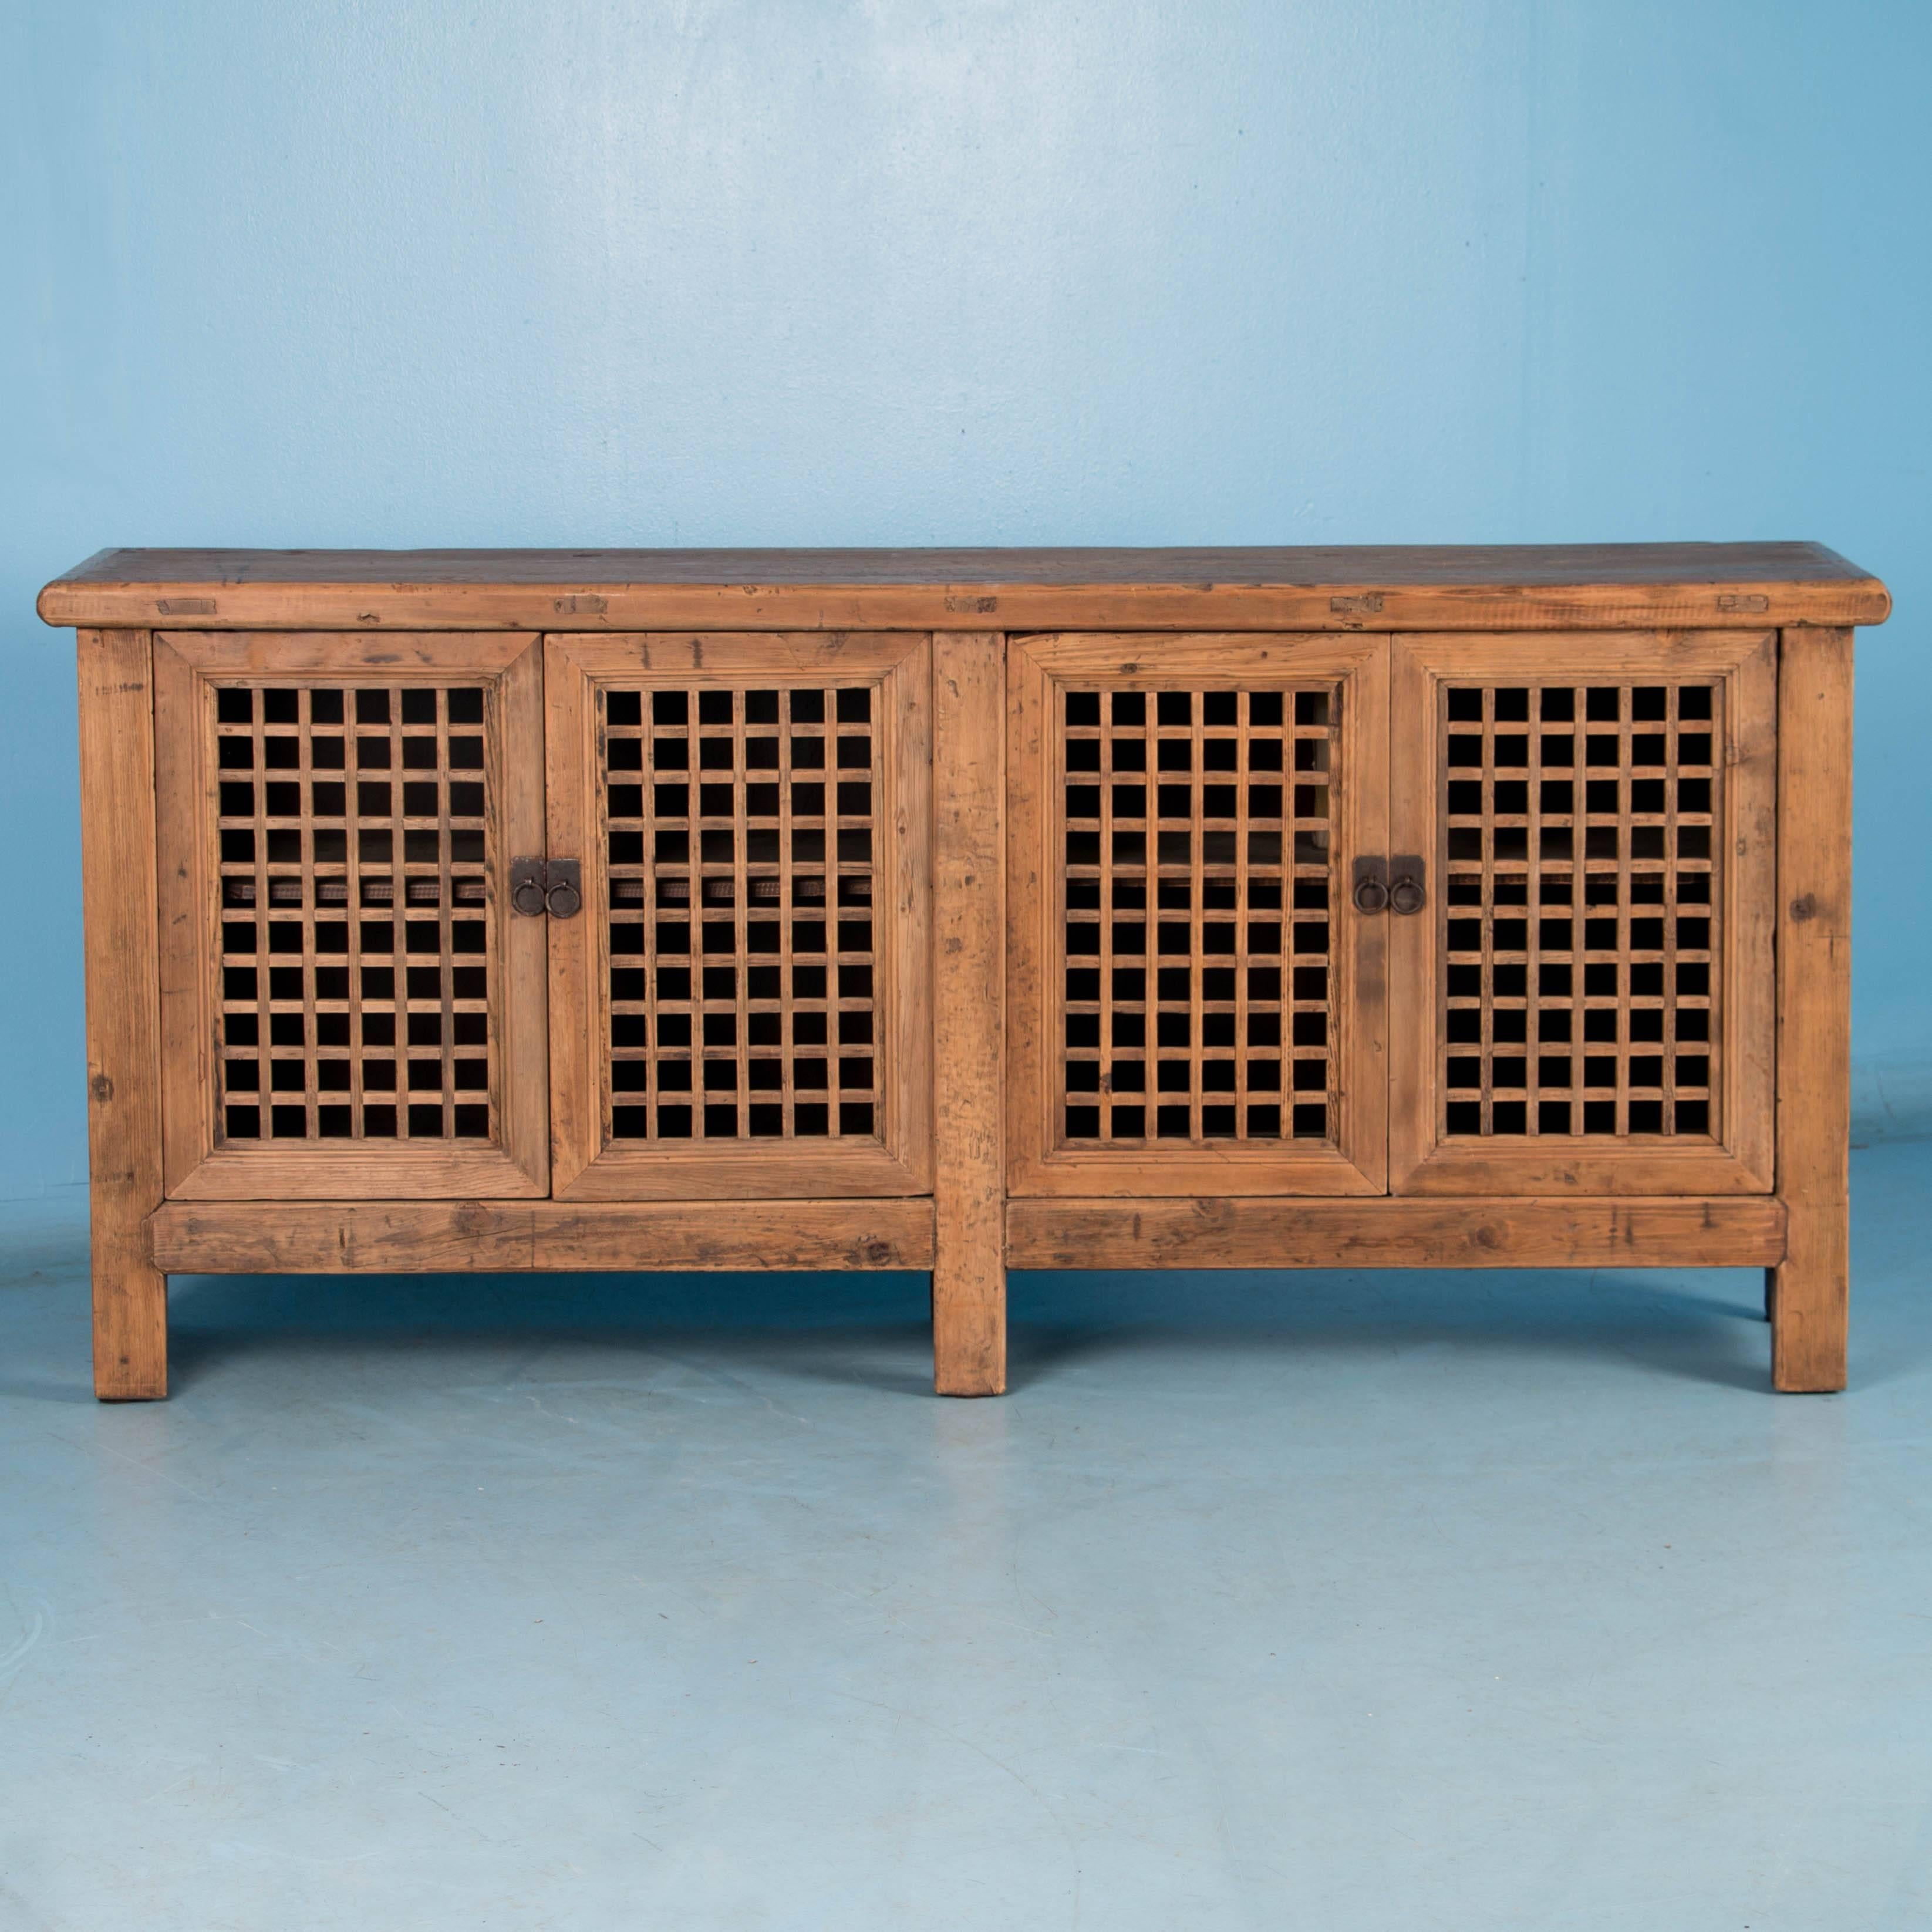 The raw wood creates an attractive organic look to this unique sideboard, while the four lattice work doors create visual appeal as well. Please examine the close up photos to appreciate the wood itself. Thanks to the size, this sideboard may also